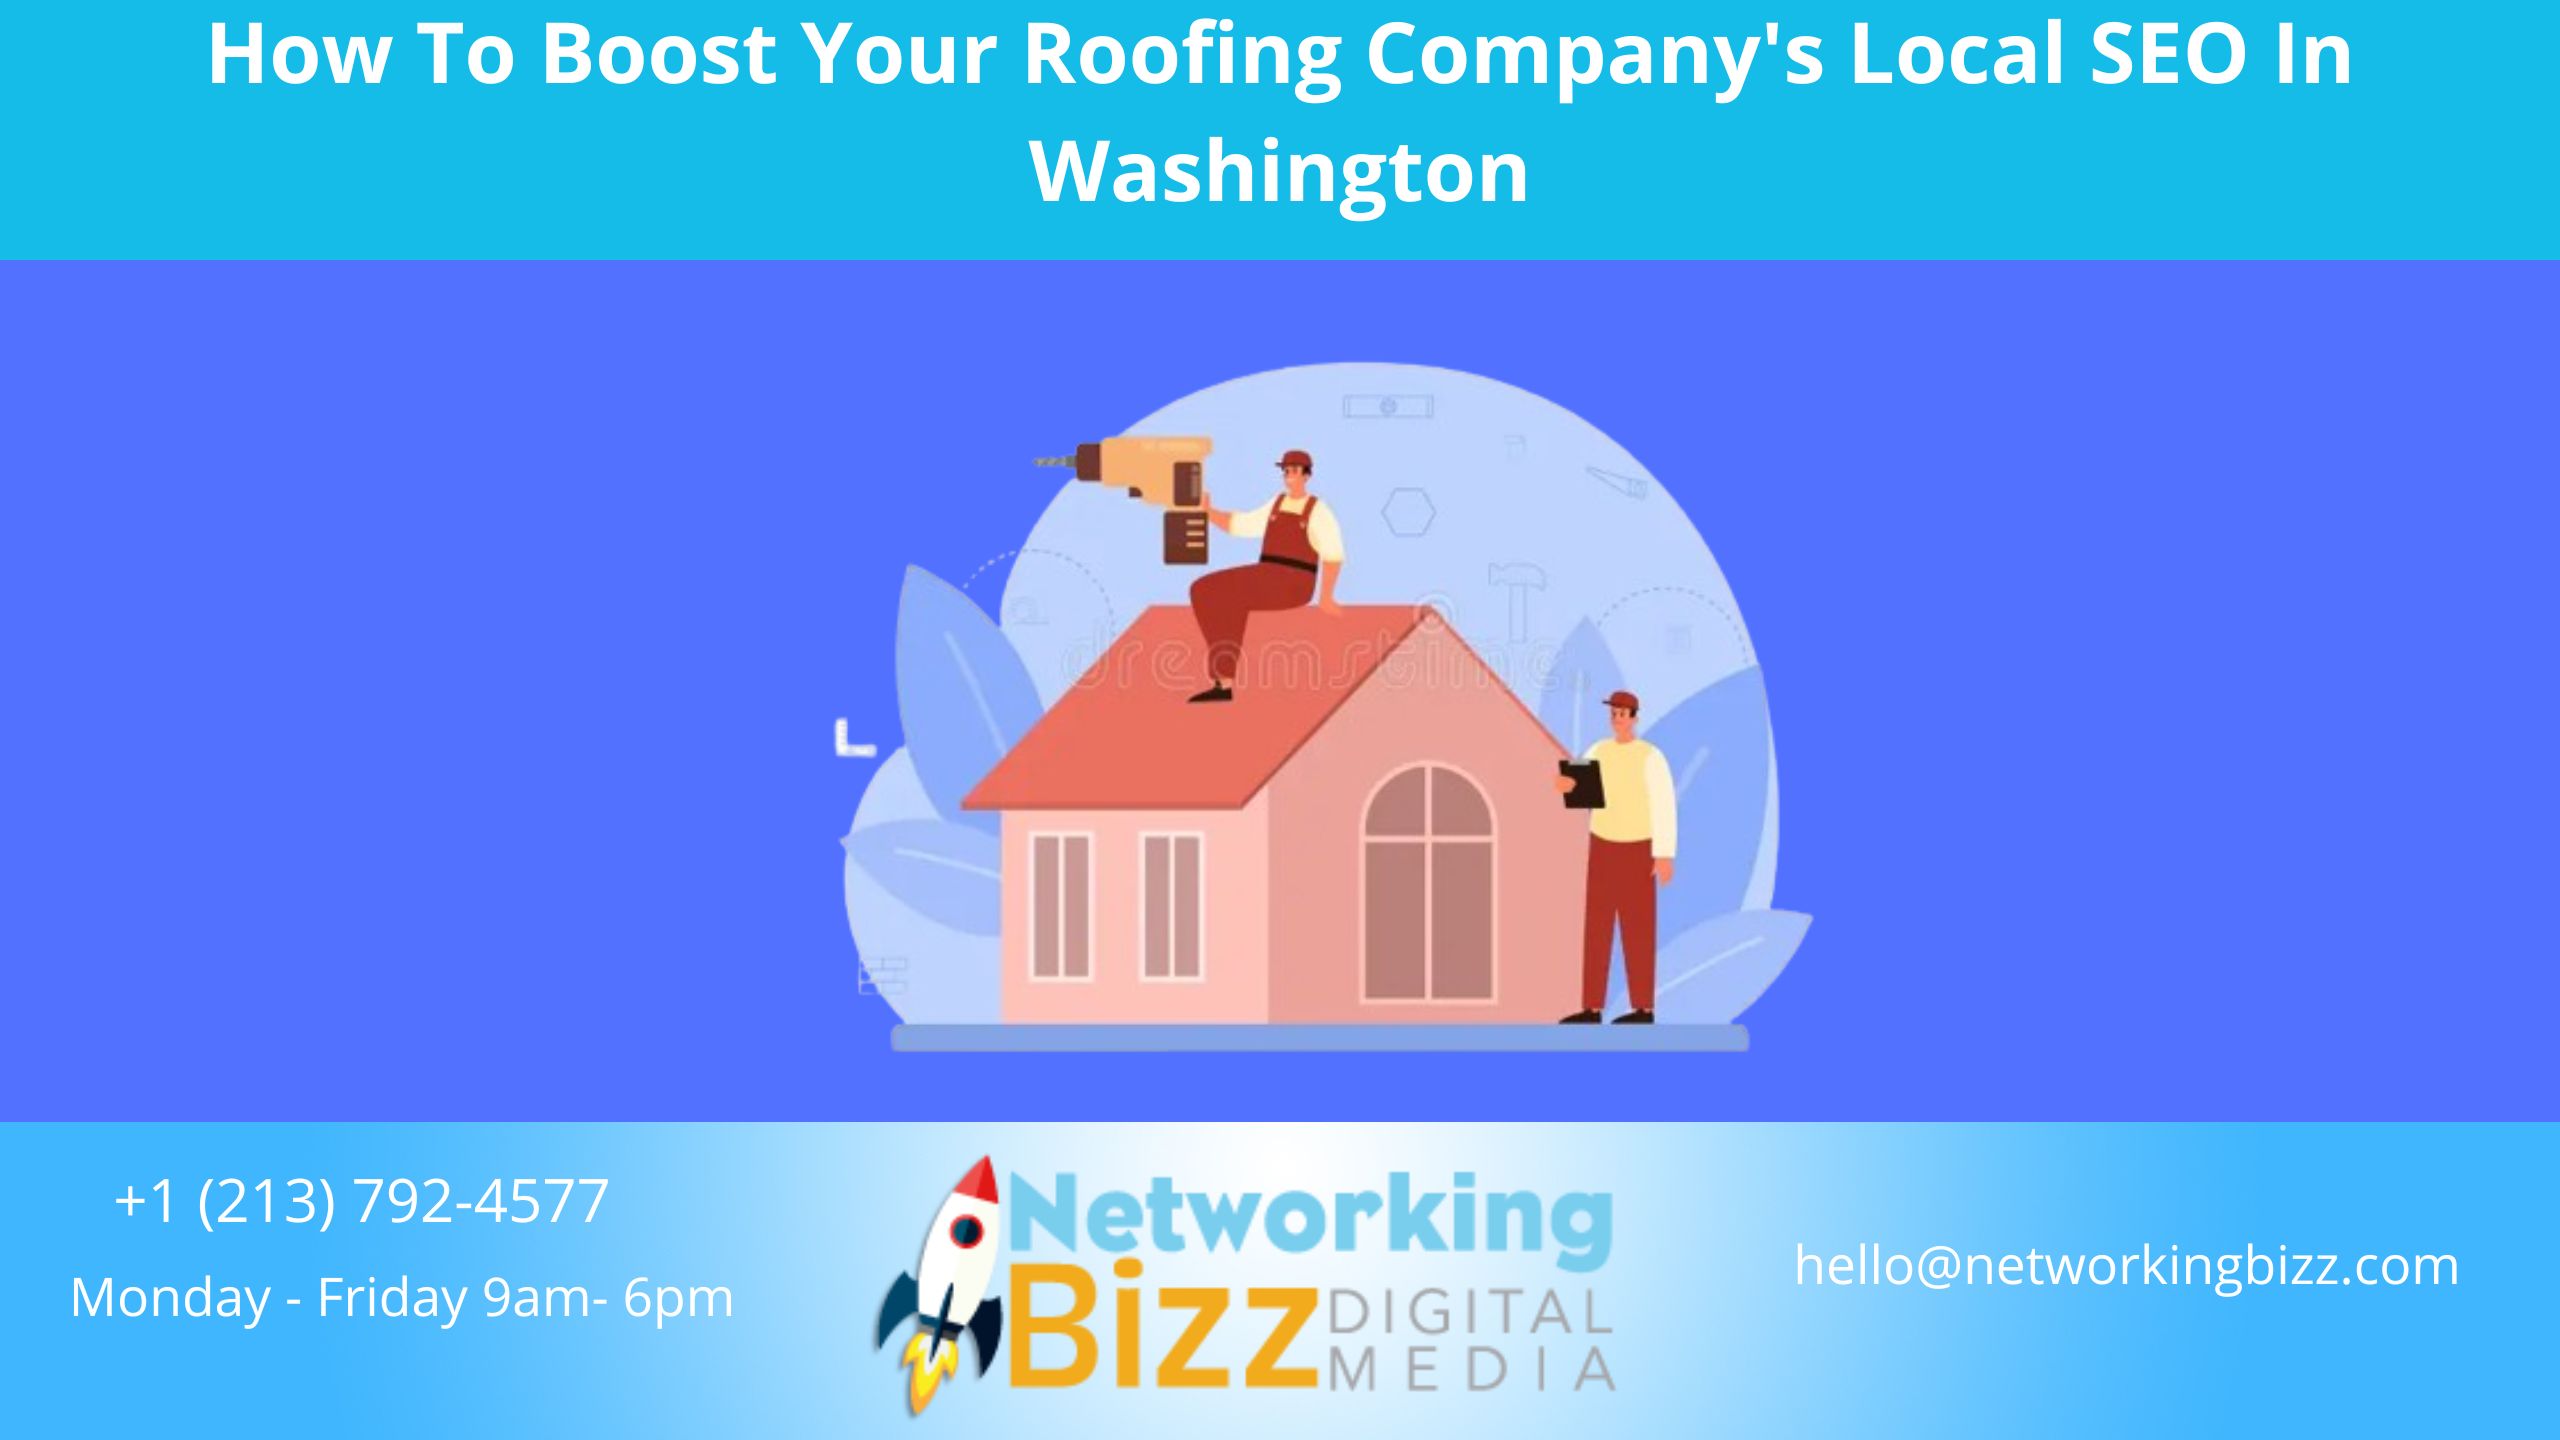 How To Boost Your Roofing Company’s Local SEO In Washington 